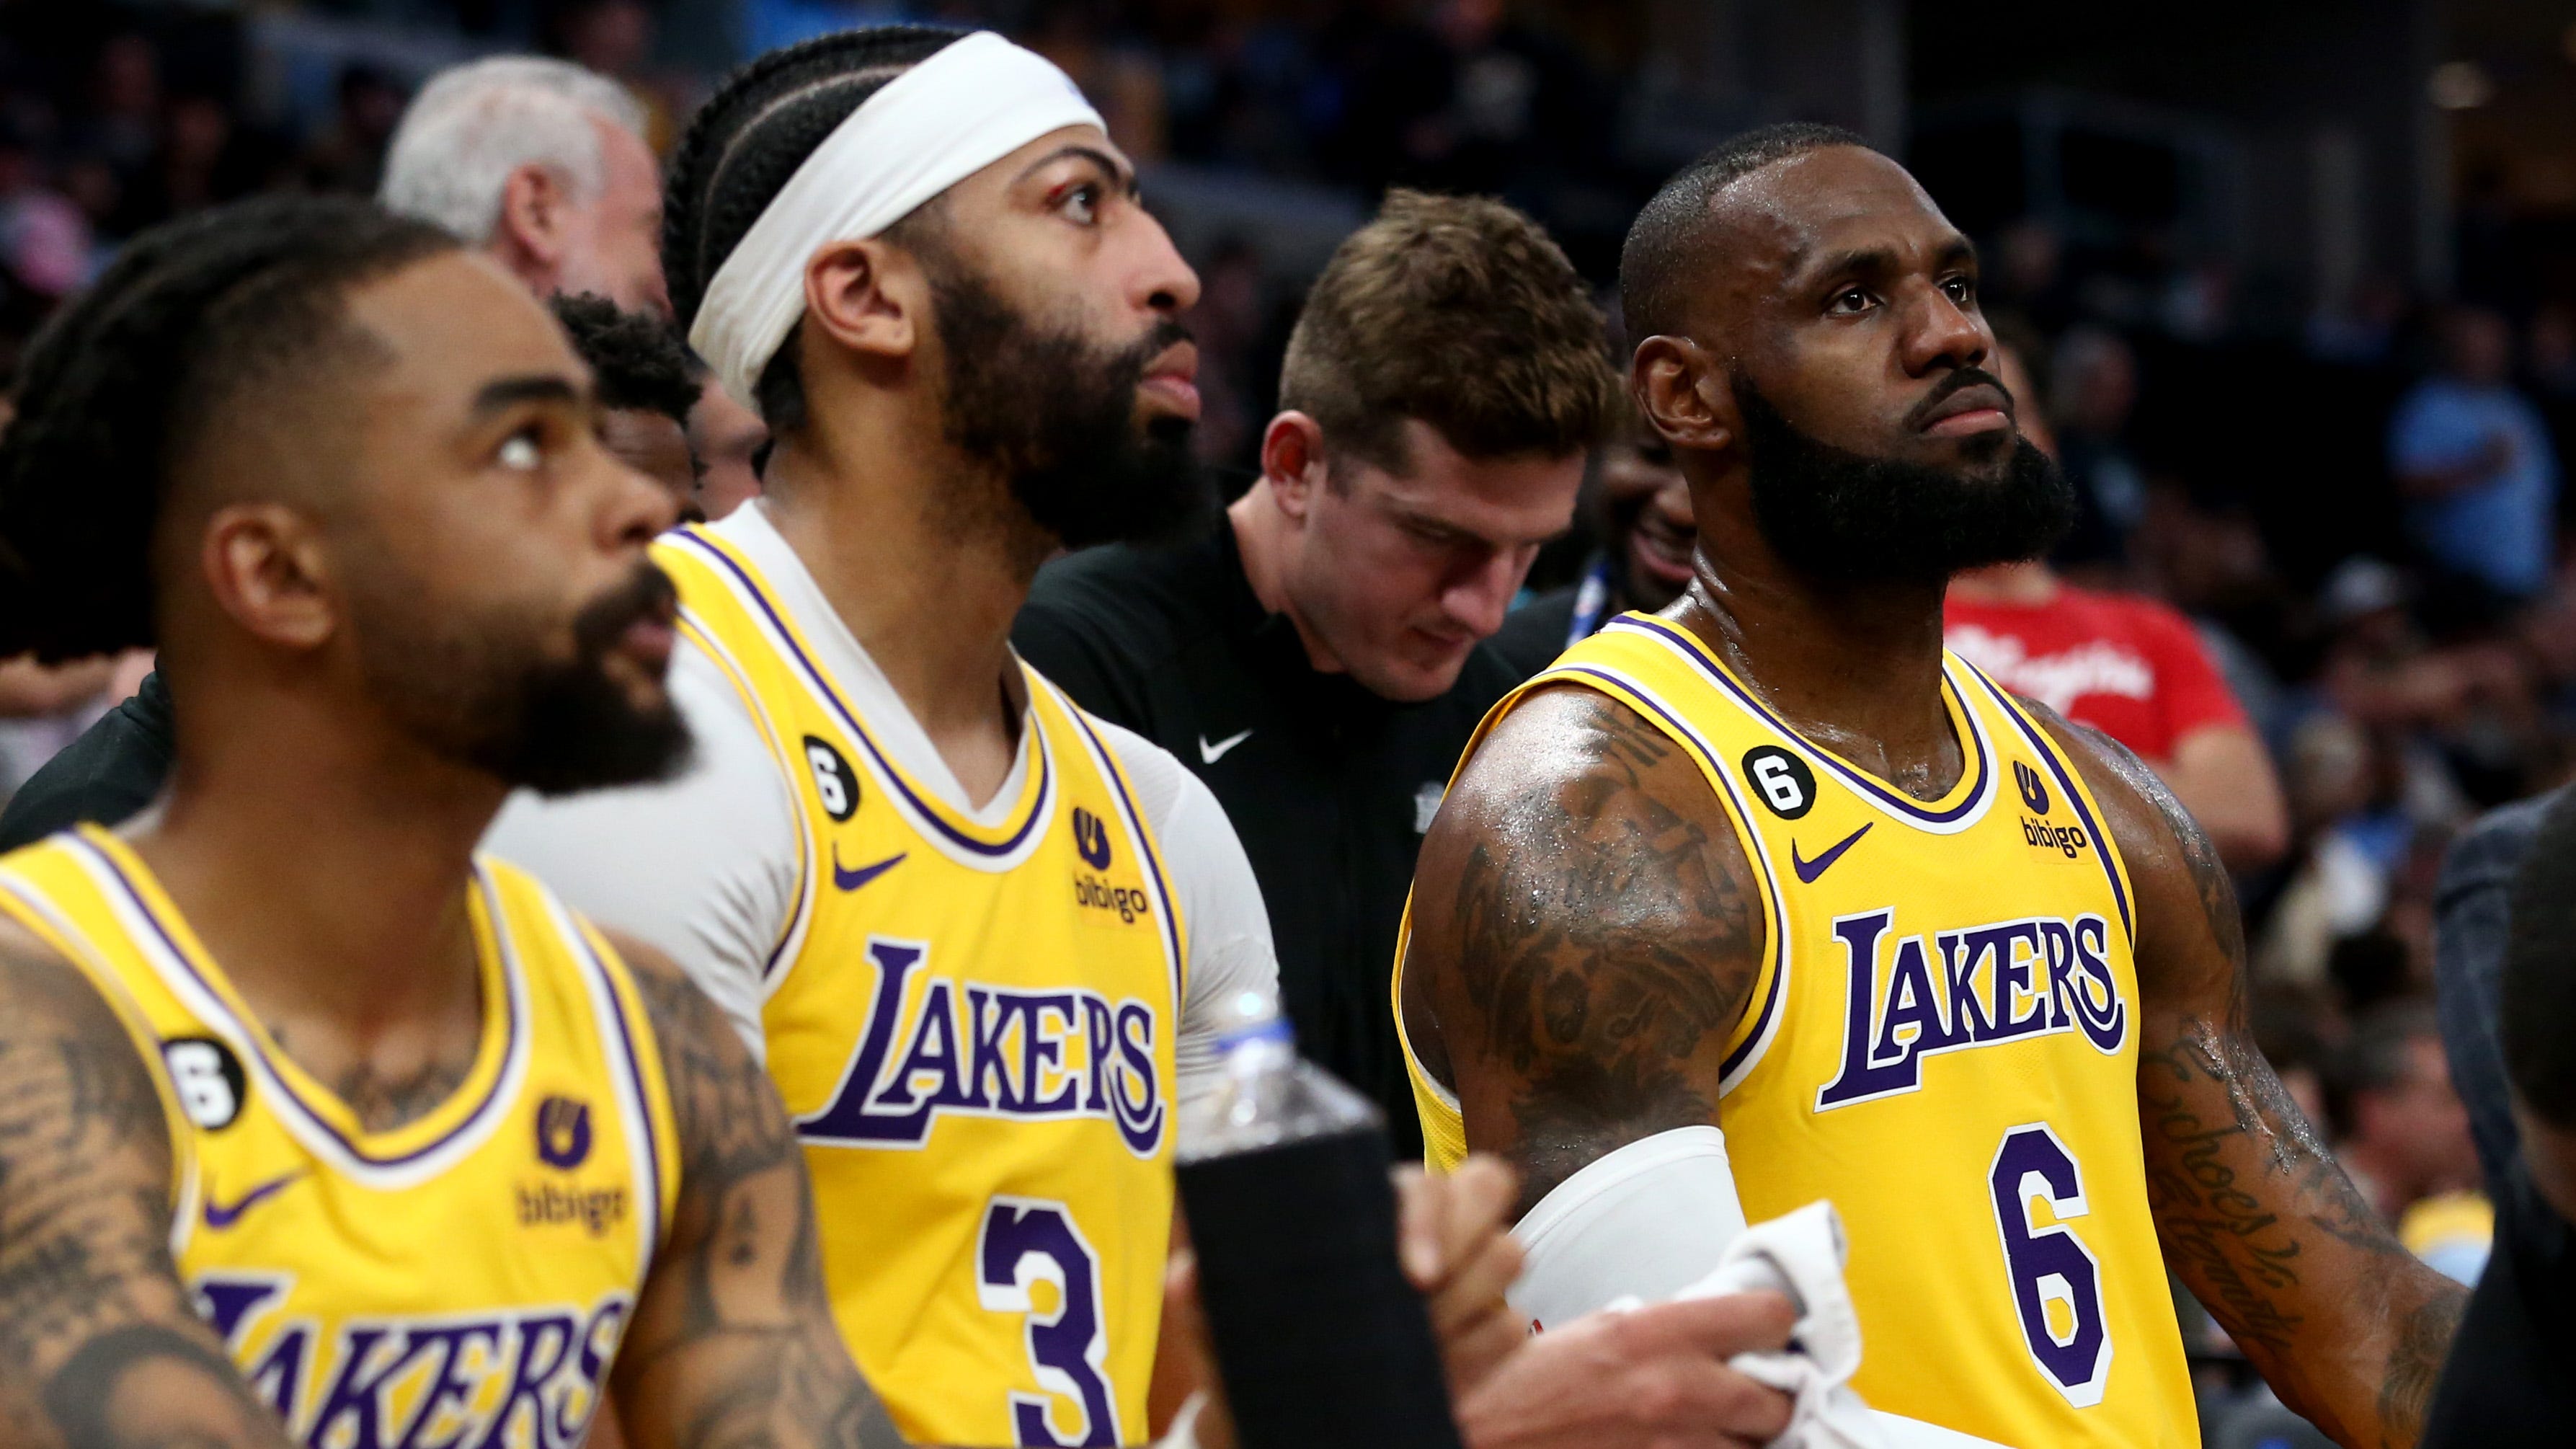 The Lakers' D'Angelo Russell, Anthony Davis and LeBron James sit on the bench during a timeout in Game 2.